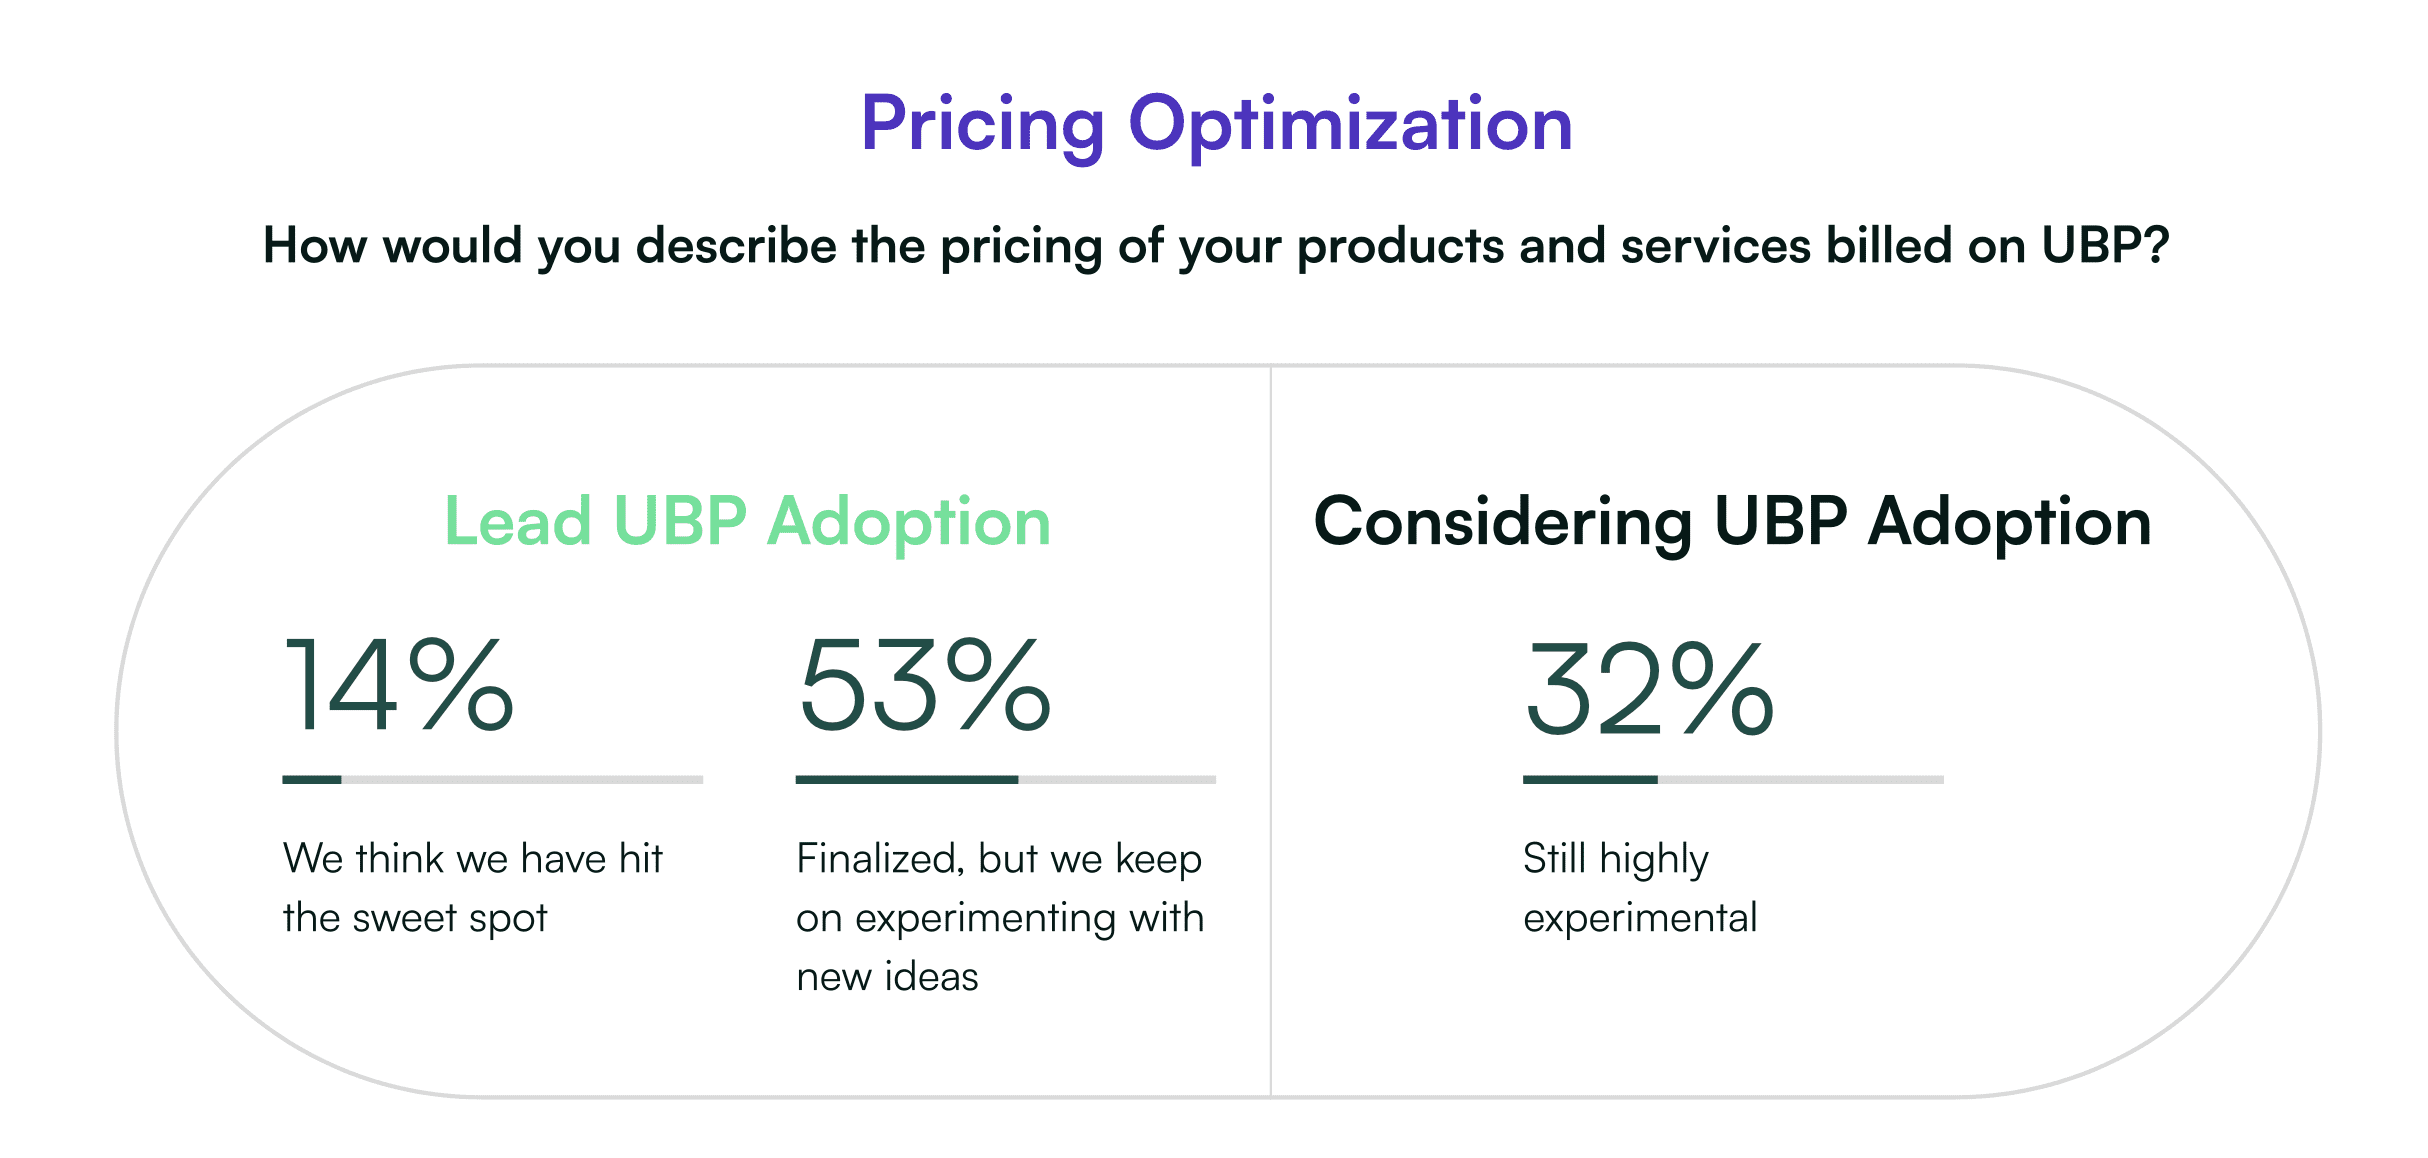 More SaaS businesses are now either implementing or considering the usage-based pricing model